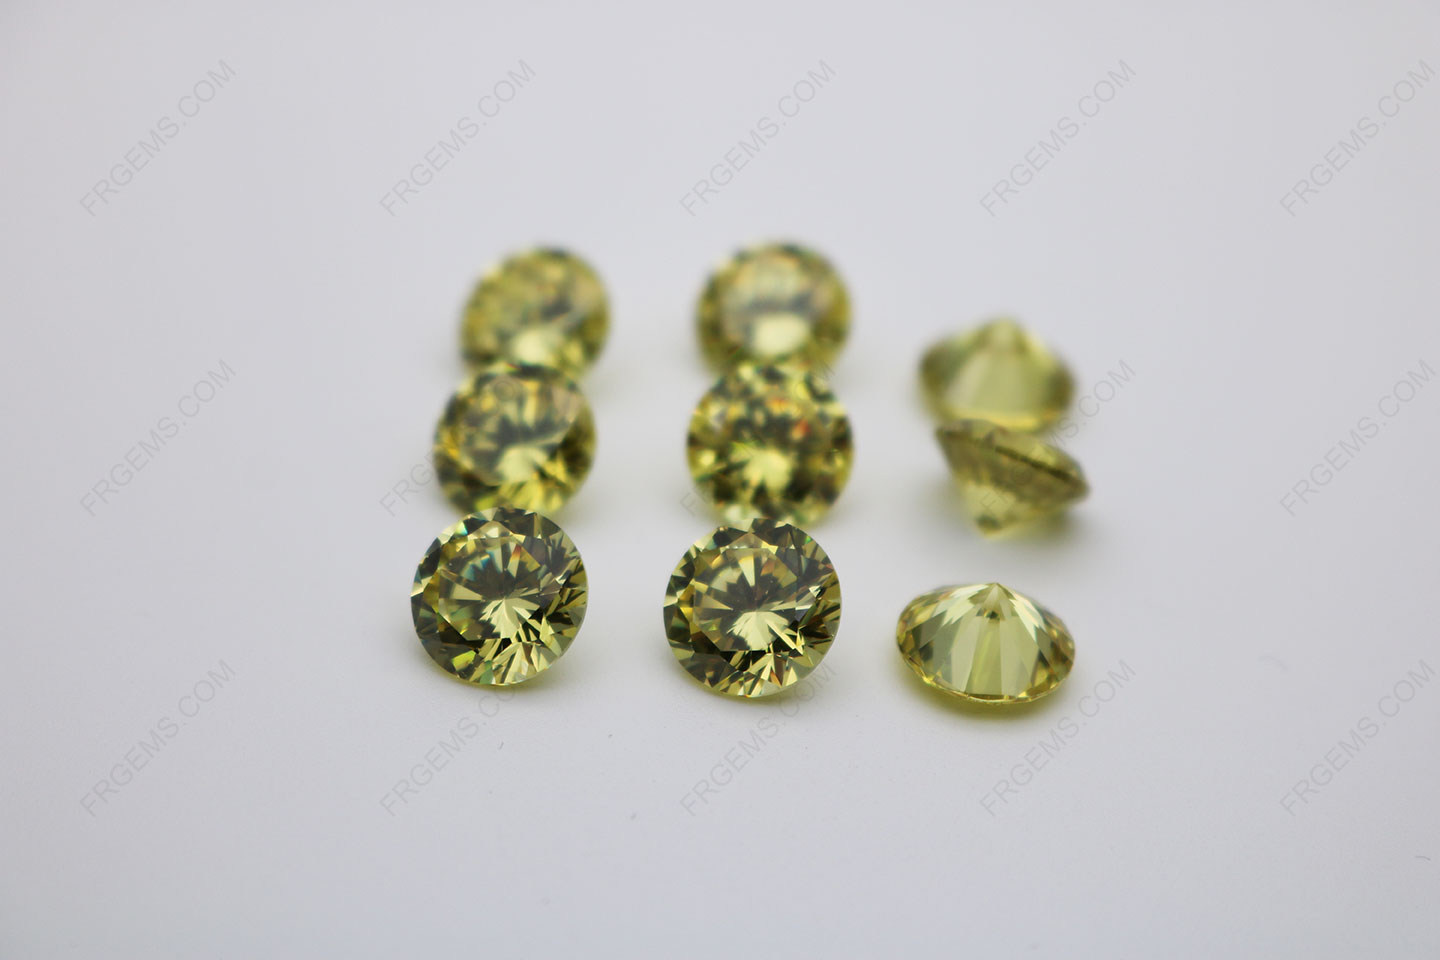 Cubic Zirconia Olive Yellow Round Shape Diamond faceted Cut 10mm stones CZ25 IMG_0240